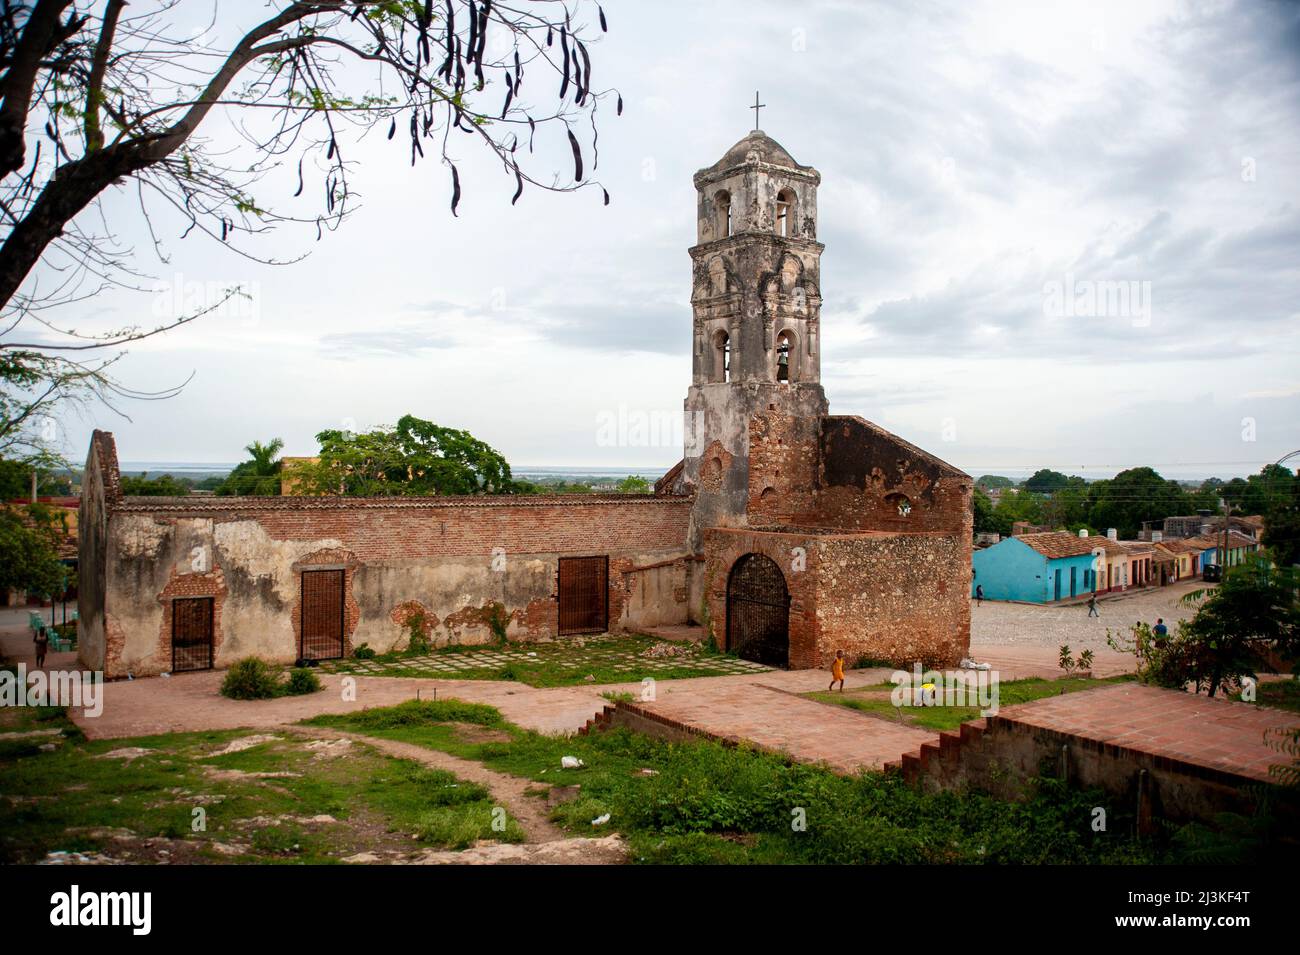 Santa Ana Church. a dilapidated old church in Trinidad, Cuba with a view of the sky and the Caribbean ocean in the distance. Stock Photo